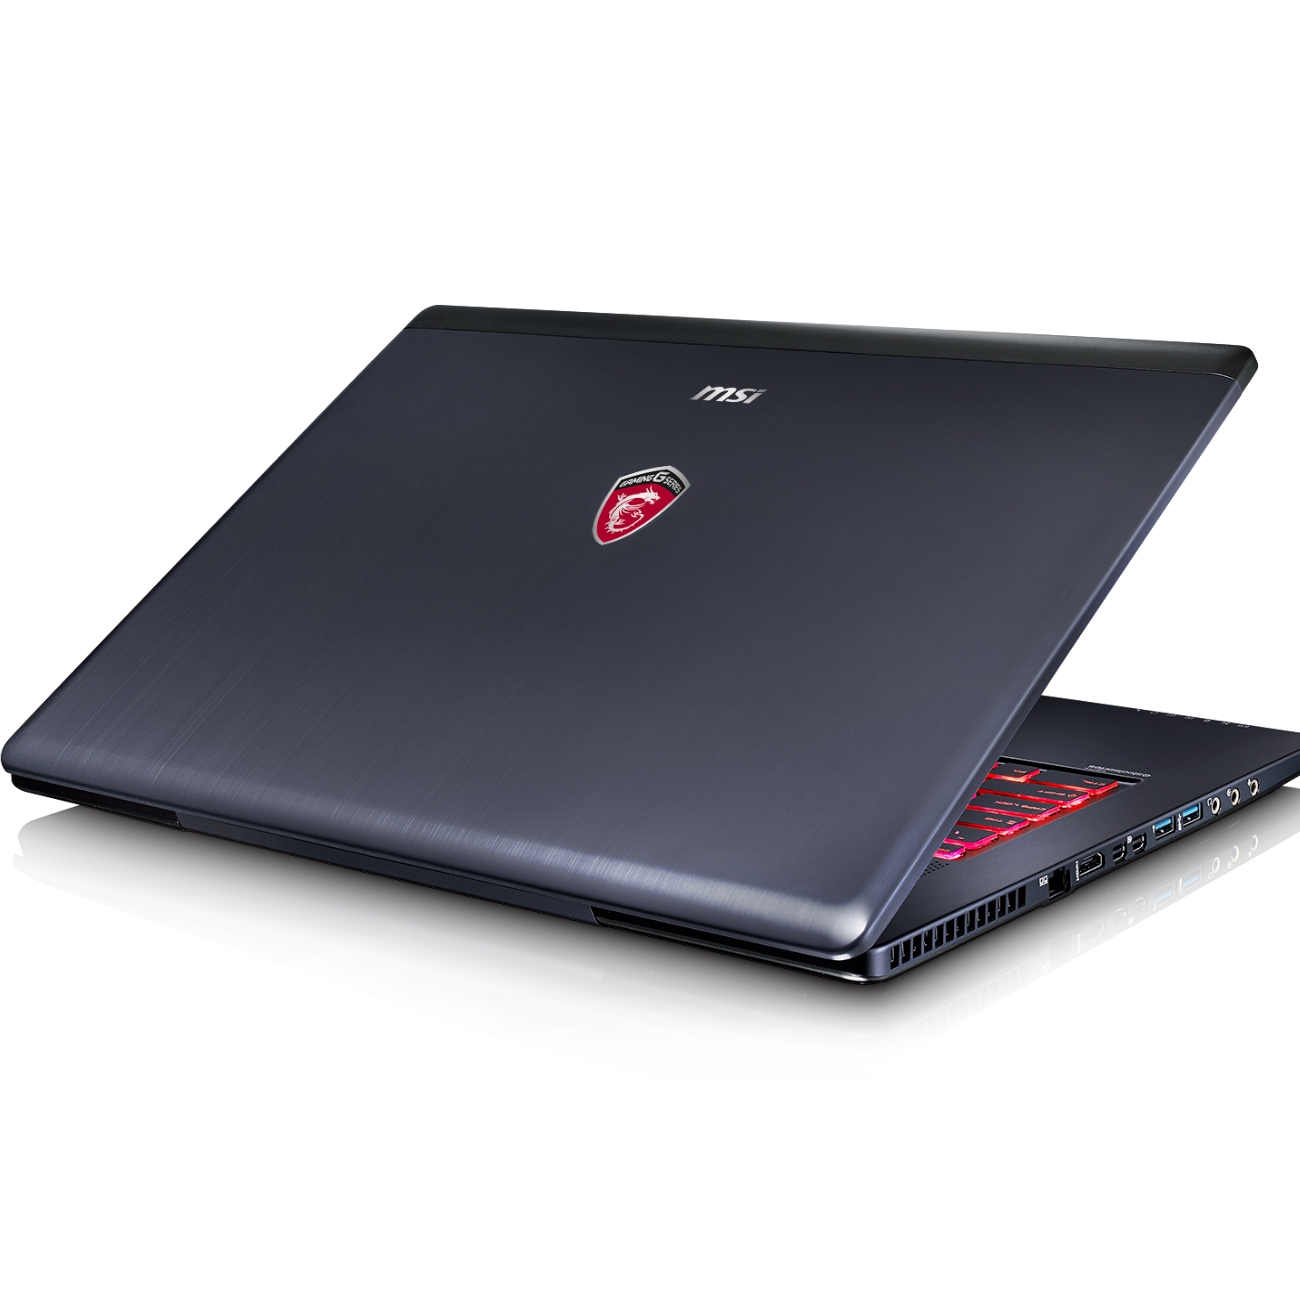 MSI GS70 6QE Stealth Pro Notebook Review - NotebookCheck.net Reviews